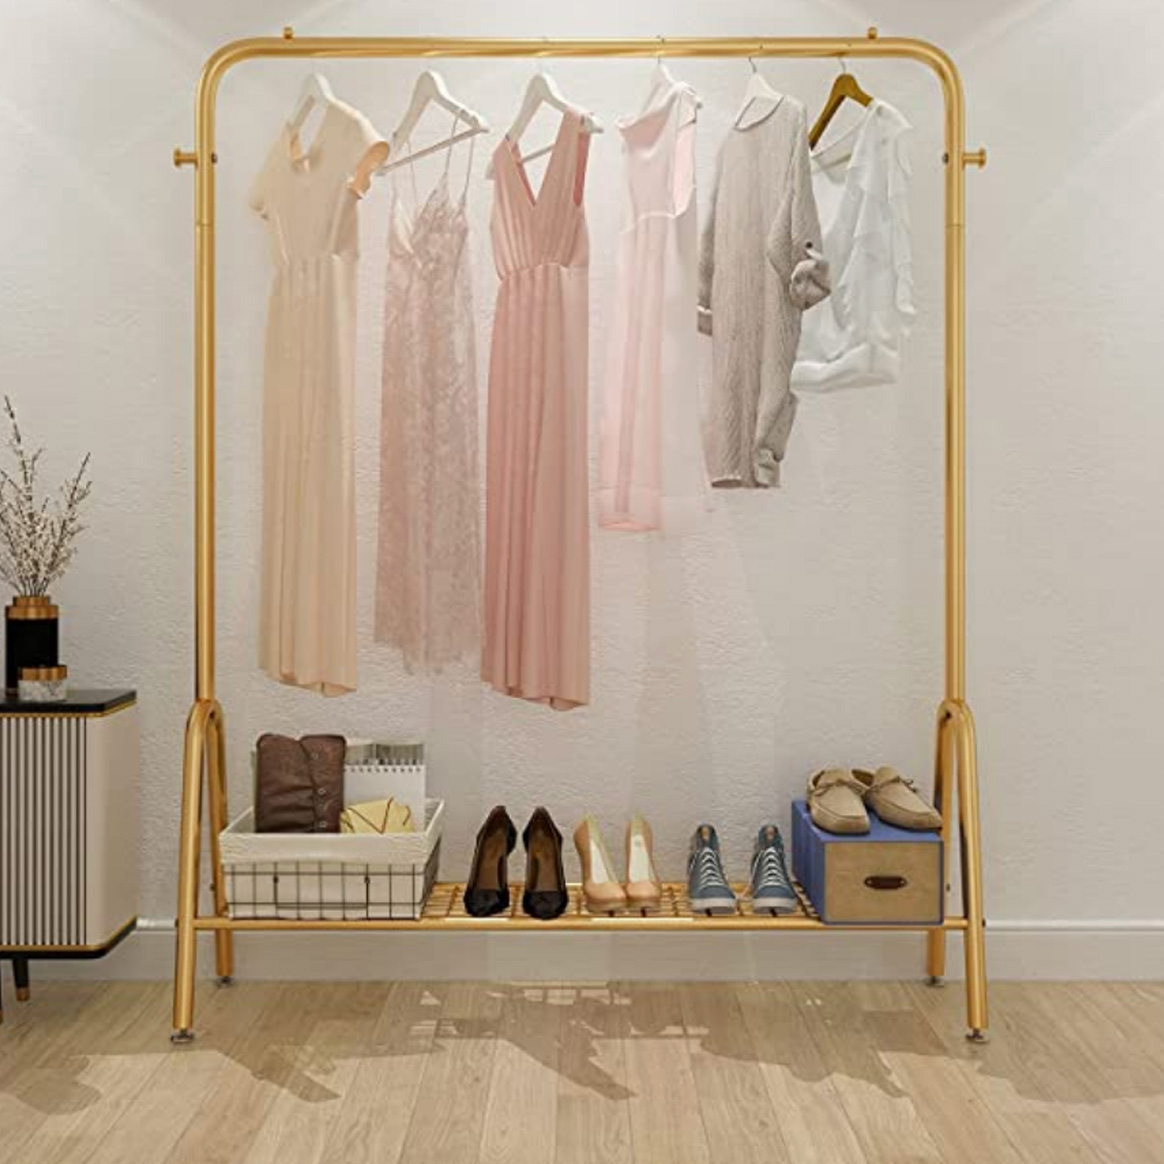 10 Ideas to Maximize Closet Space in A Small Apartment - That Actually ...